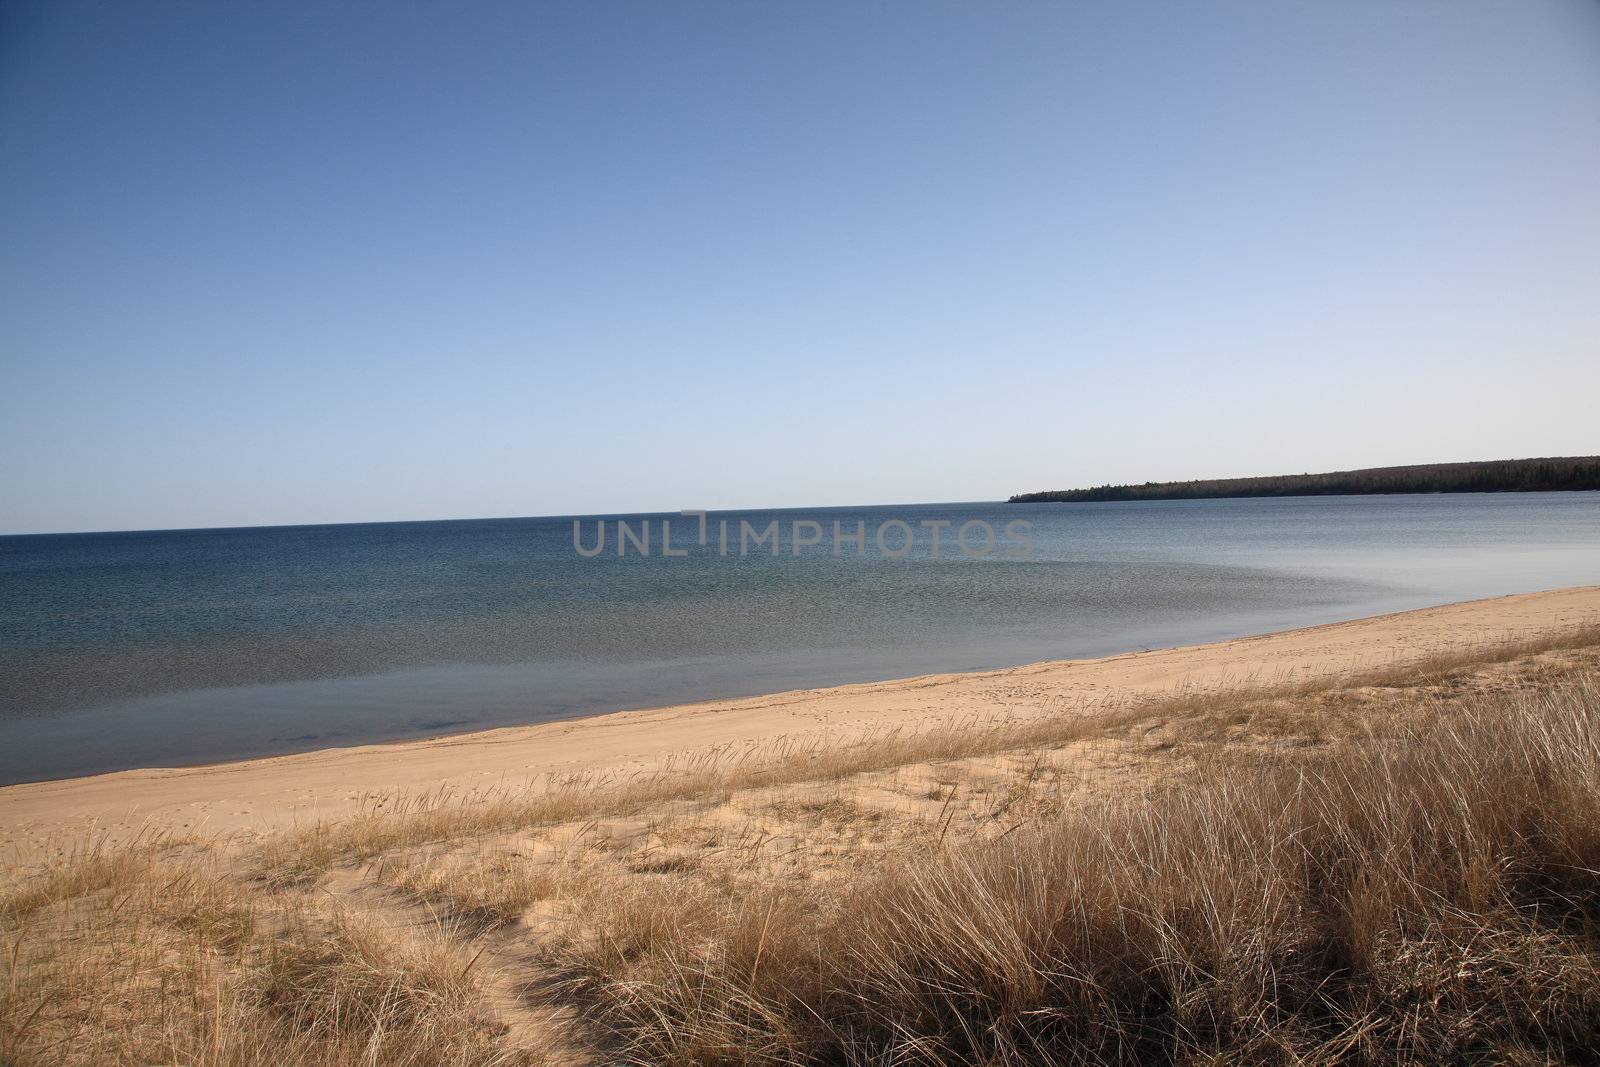 Grassy shoreline and beach of a North American Great Lake